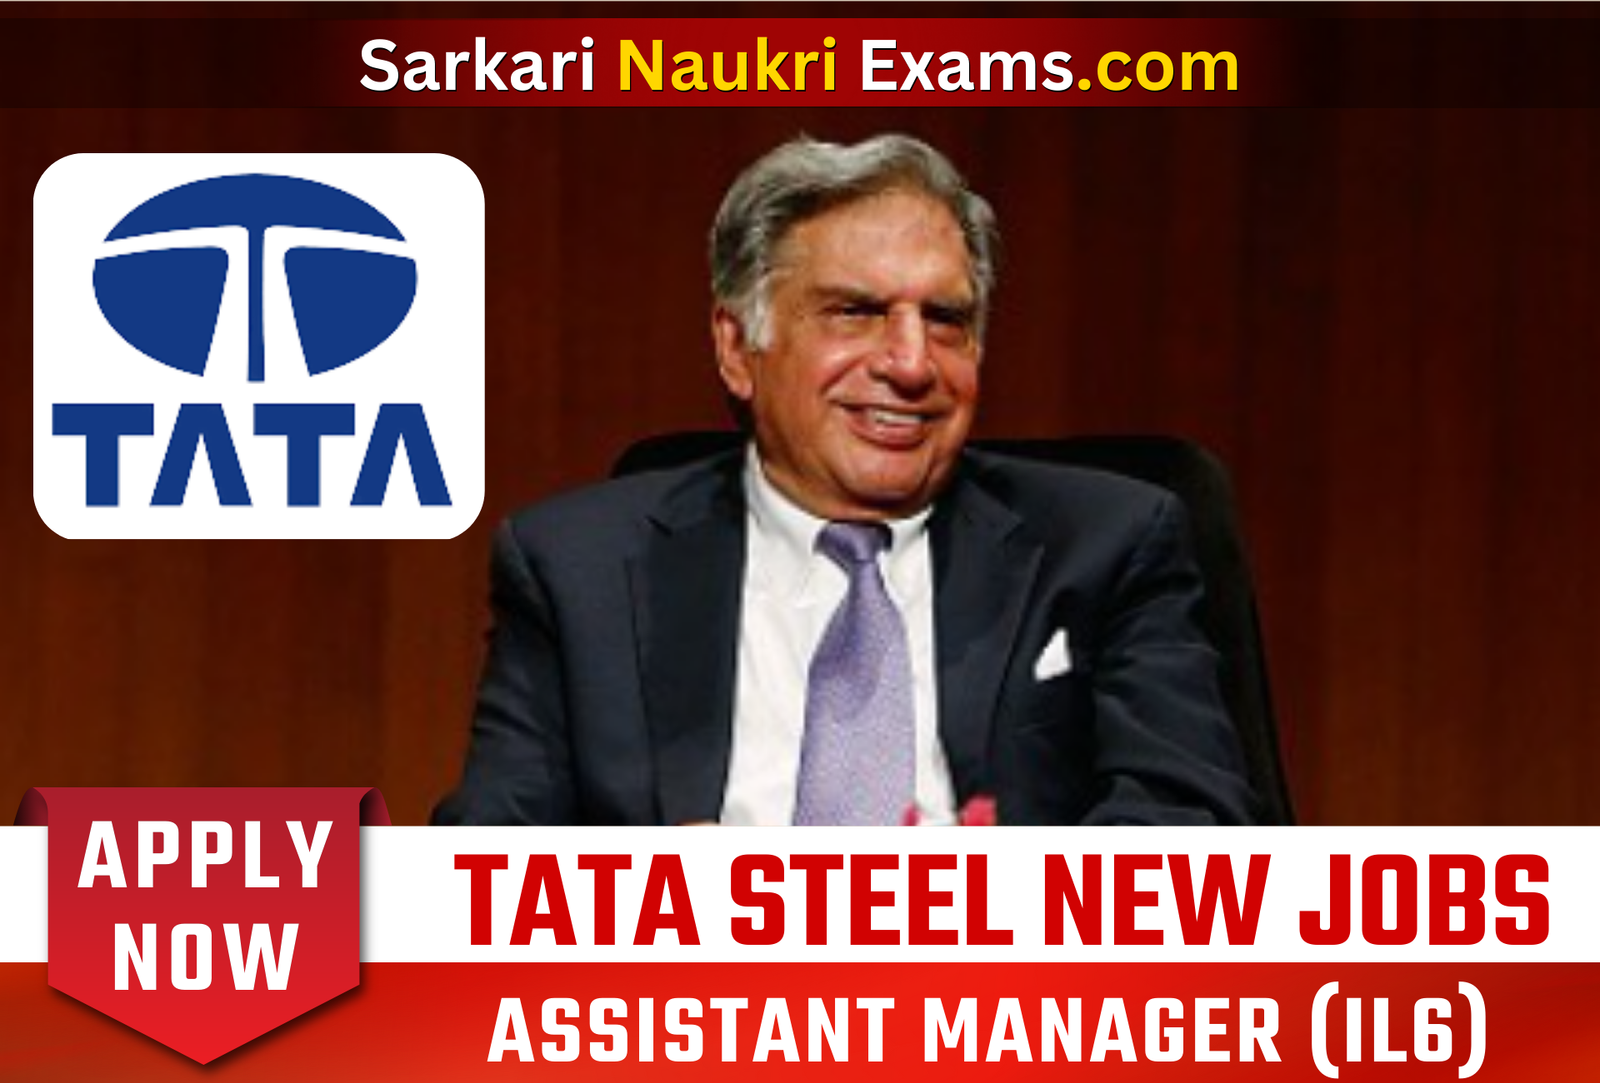 Tata Steel Assistant Manager (IL6) Recruitment 2023 for Engineering and Projects Division